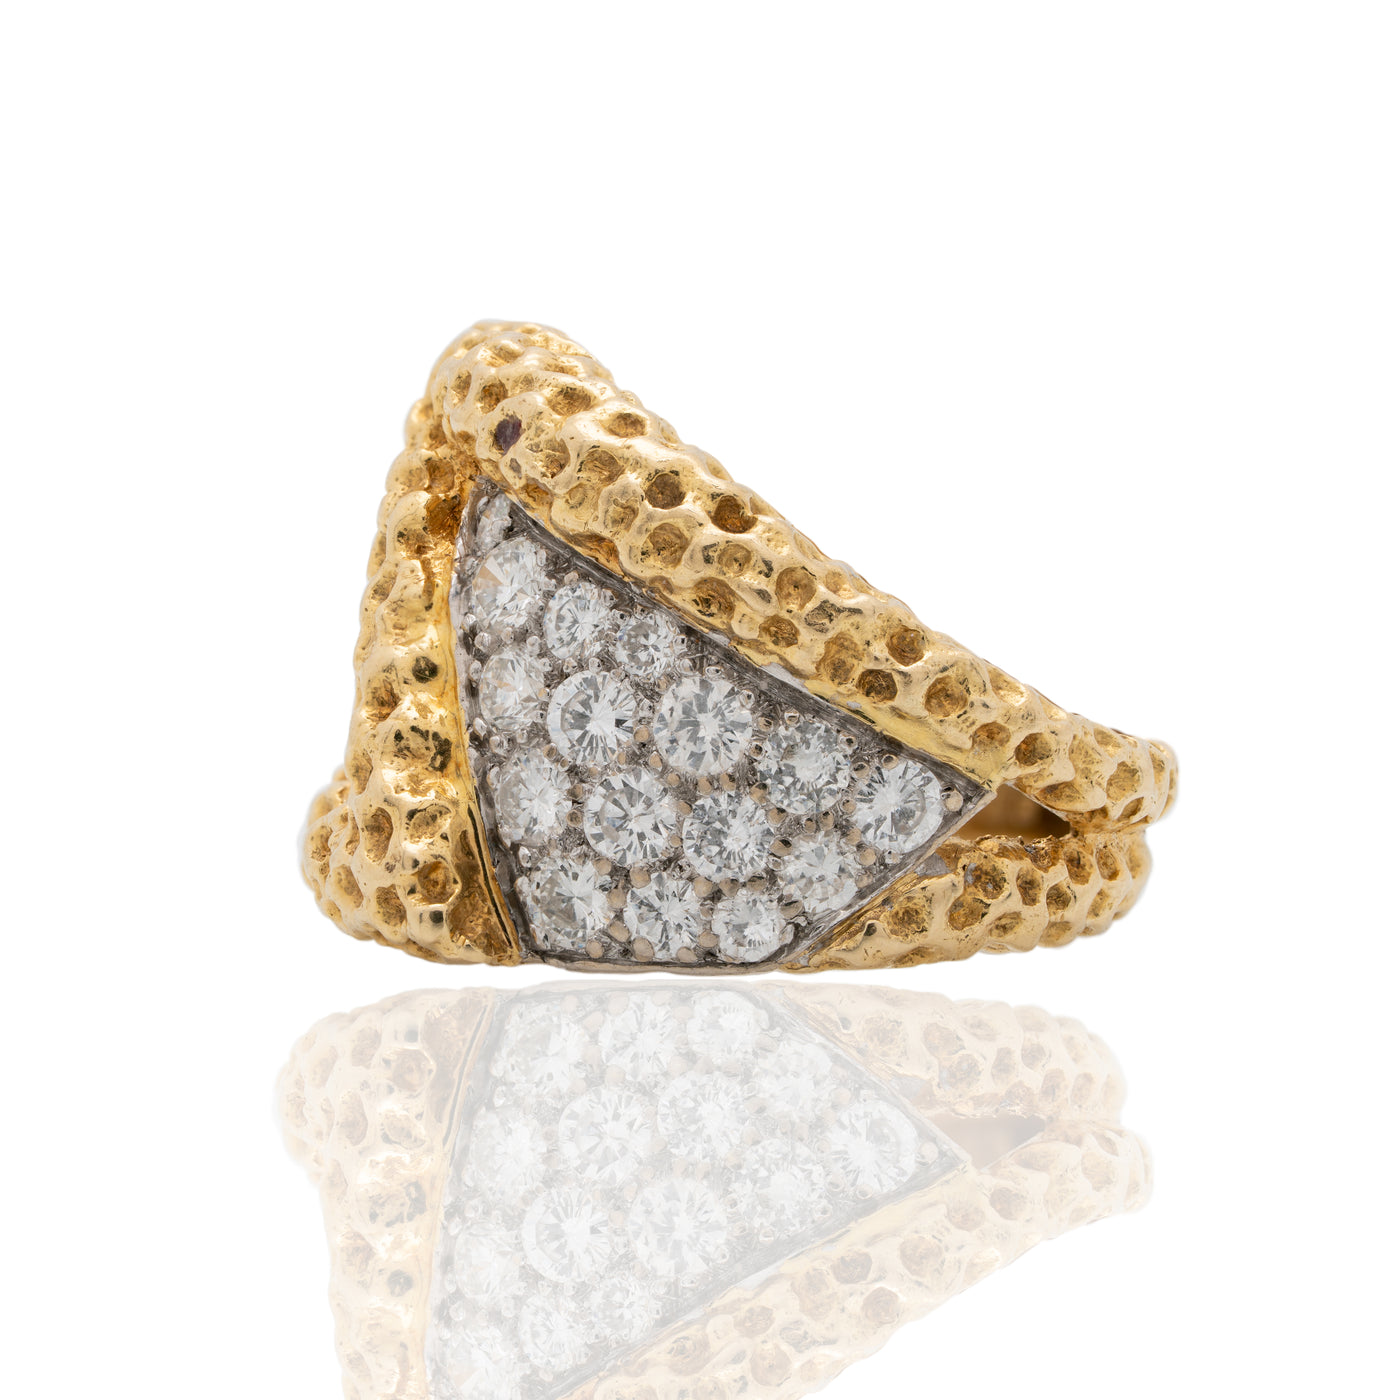 KUTCHINSKY HAND FORGED 18K YELLOW GOLD AND 2.80CTS. TRANSITIONAL CUT DIAMOND RING c.1970s